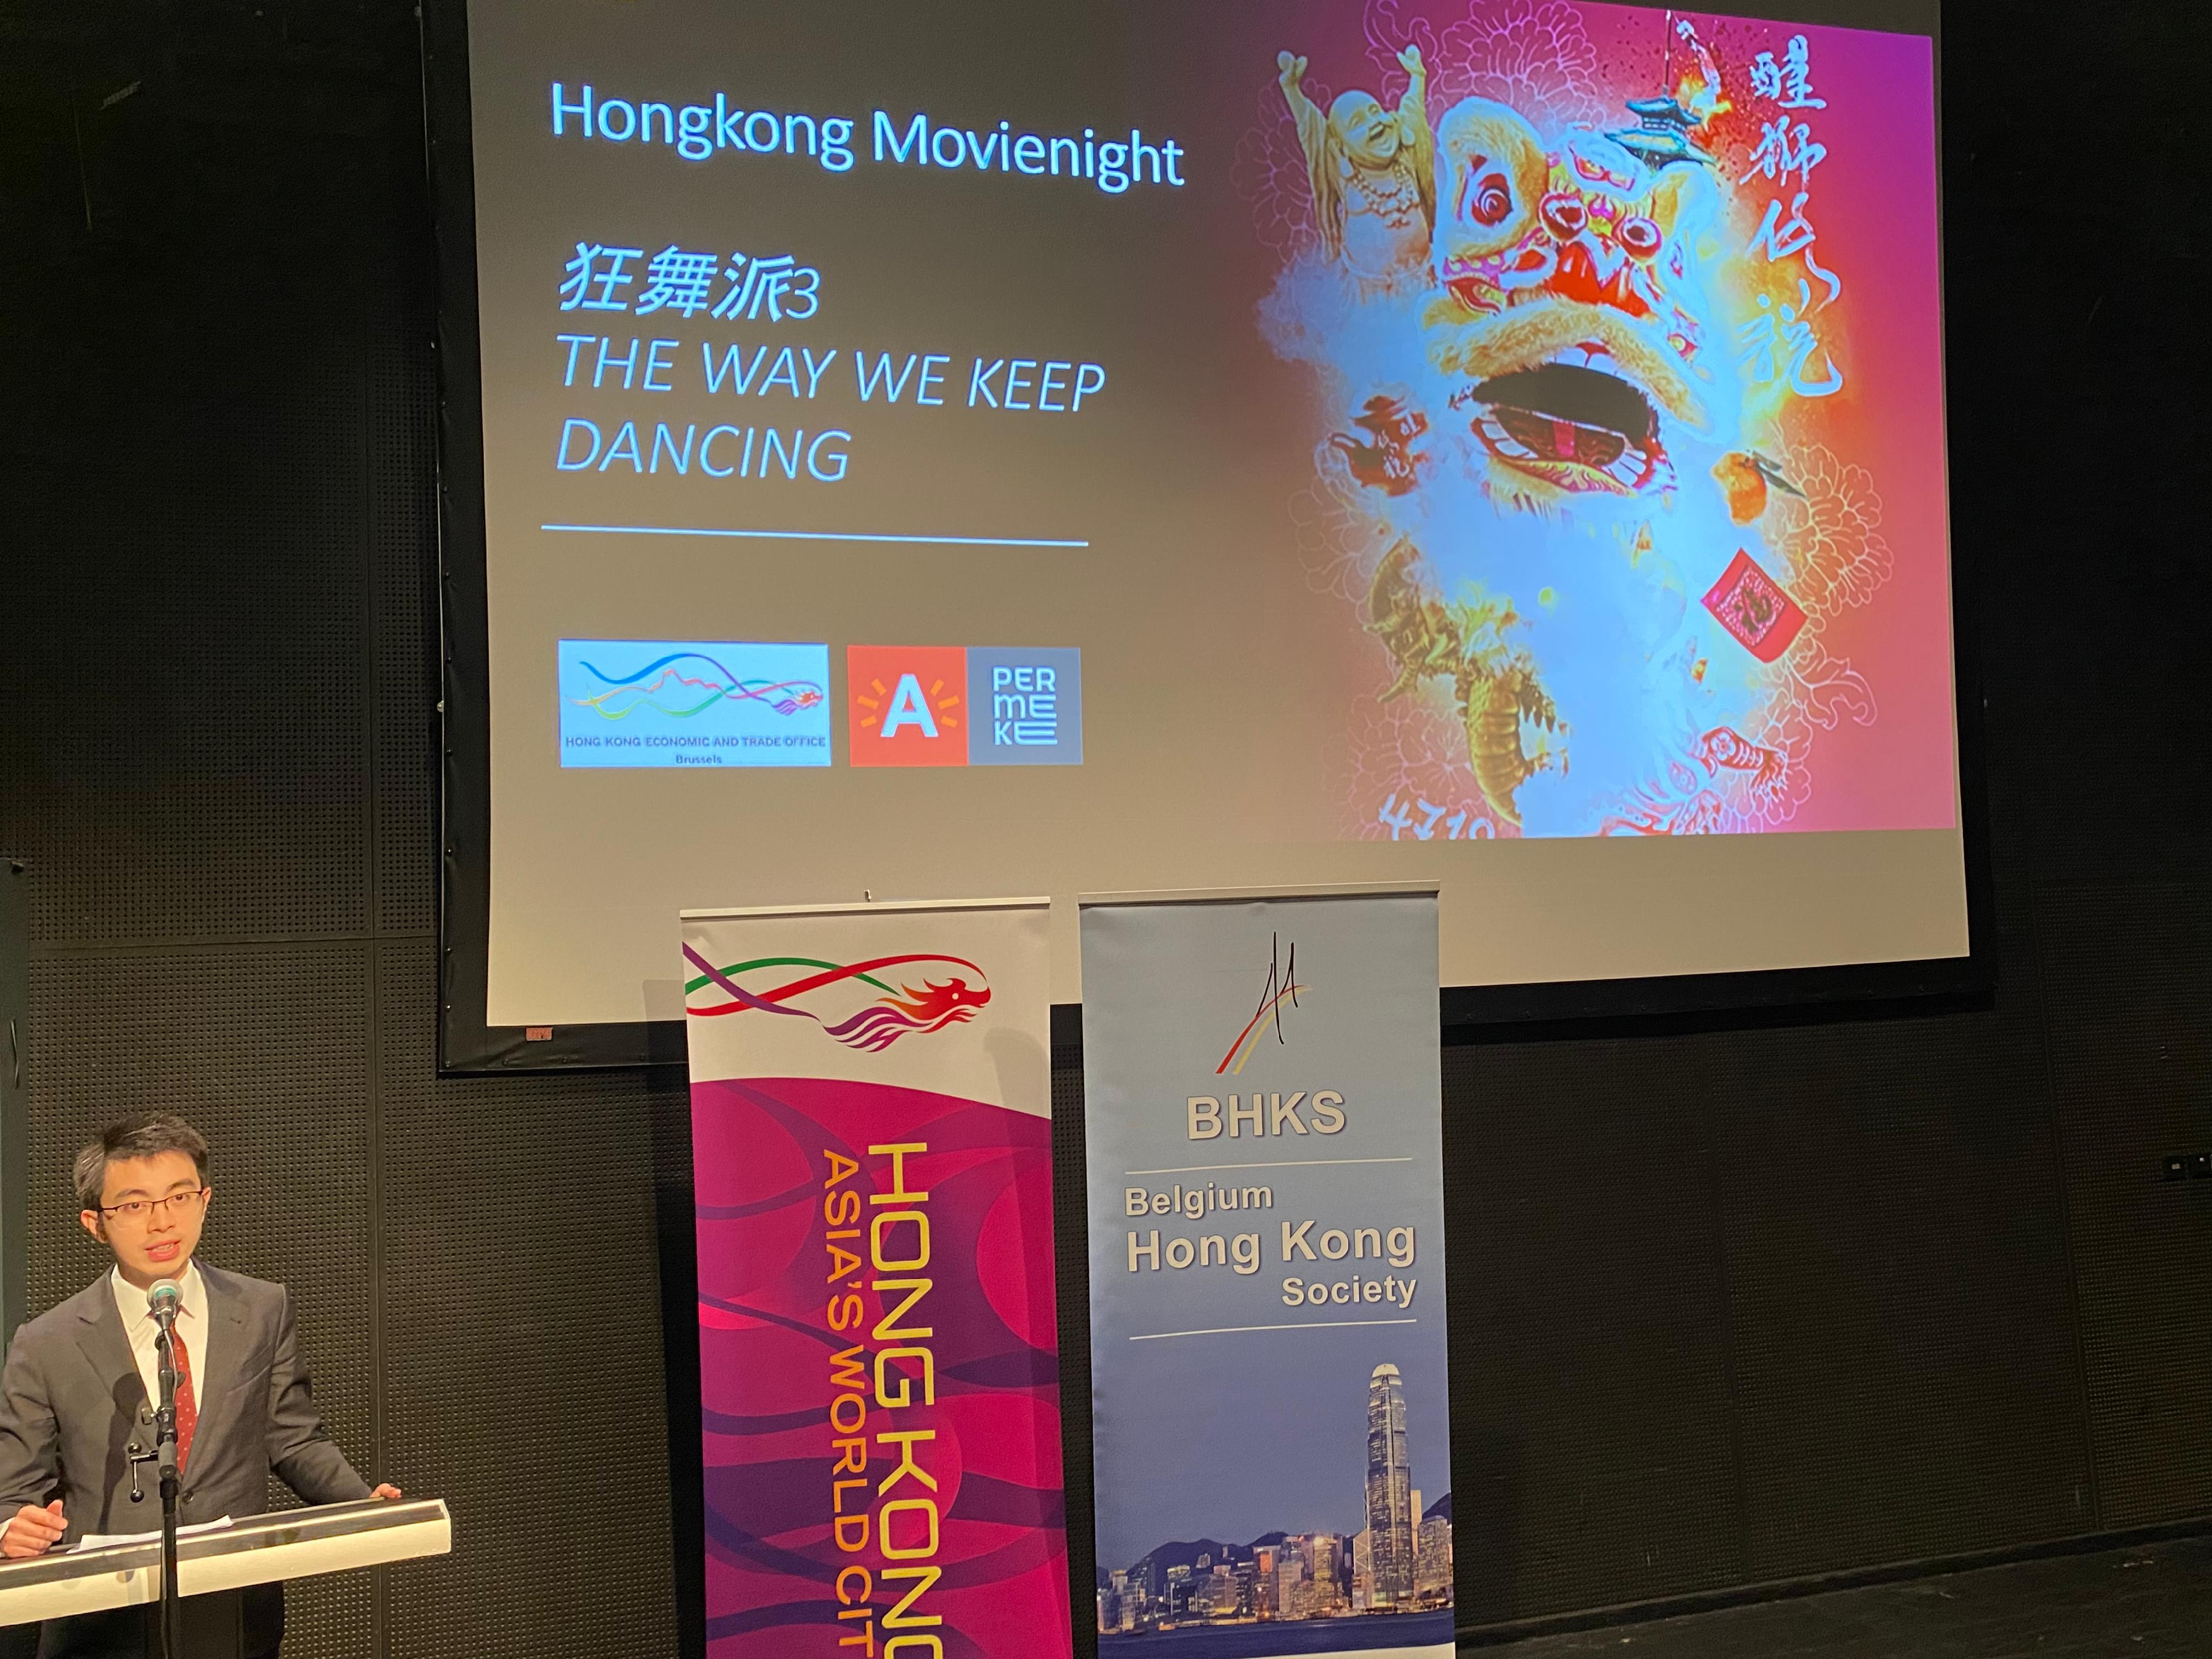 The Acting Deputy Representative of the Hong Kong Economic and Trade Office in Brussels, Mr Henry Tsoi, speaks at the opening of Hong Kong film night at the “Legends of Lion Dance” exhibition in Antwerp, Belgium on February 3 (Antwerp time).